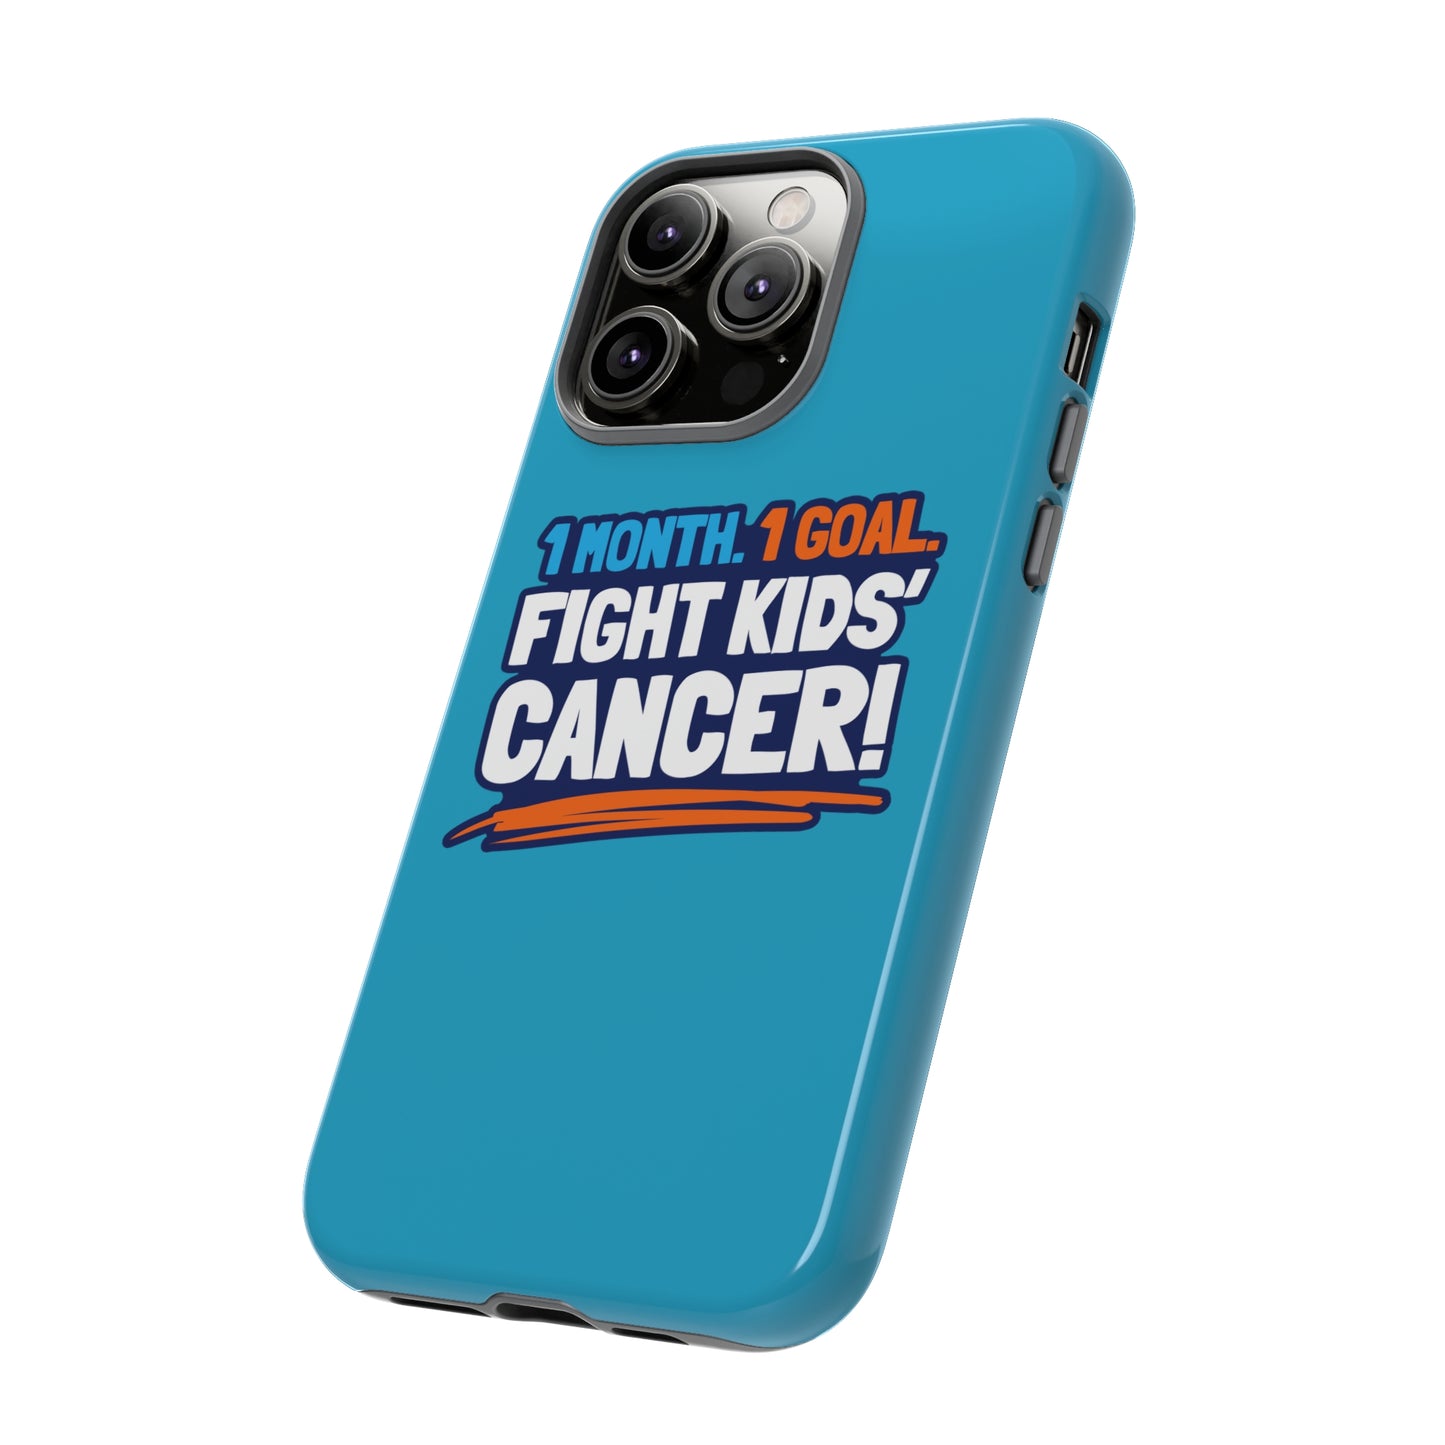 Mobile Tough Cases - 1 Month. 1 Goal. Fight Kids' Cancer!